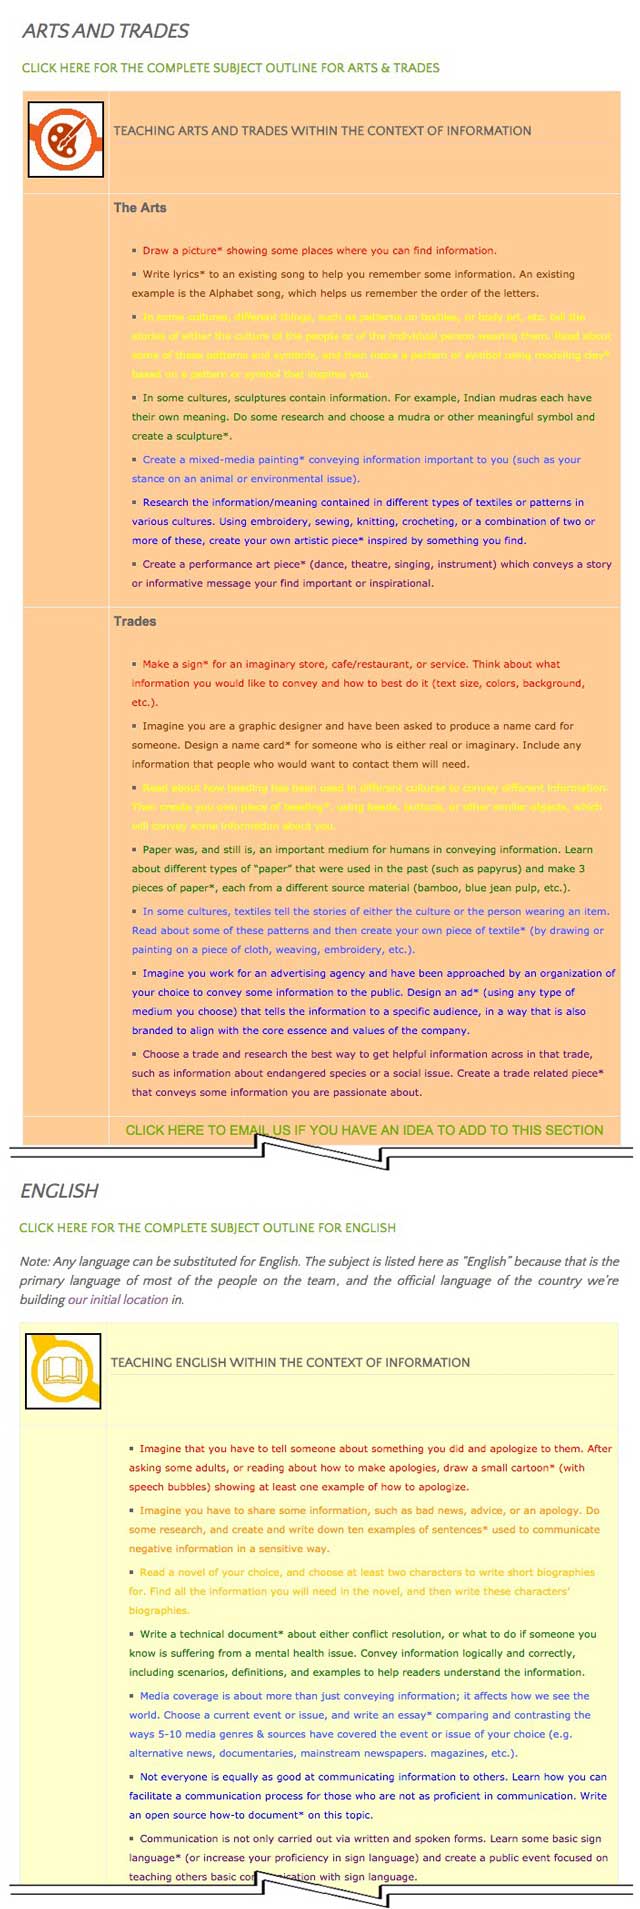 Ecological Tipping Point for an Abundant Future, This last week the core team transferred the first 25% of the written content for the Information Lesson Plan to the website, as you see here. This lesson plan purposed to teach all subjects, to all learning levels, in any learning environment, using the central theme of "Information" is now 25% completed on our website.